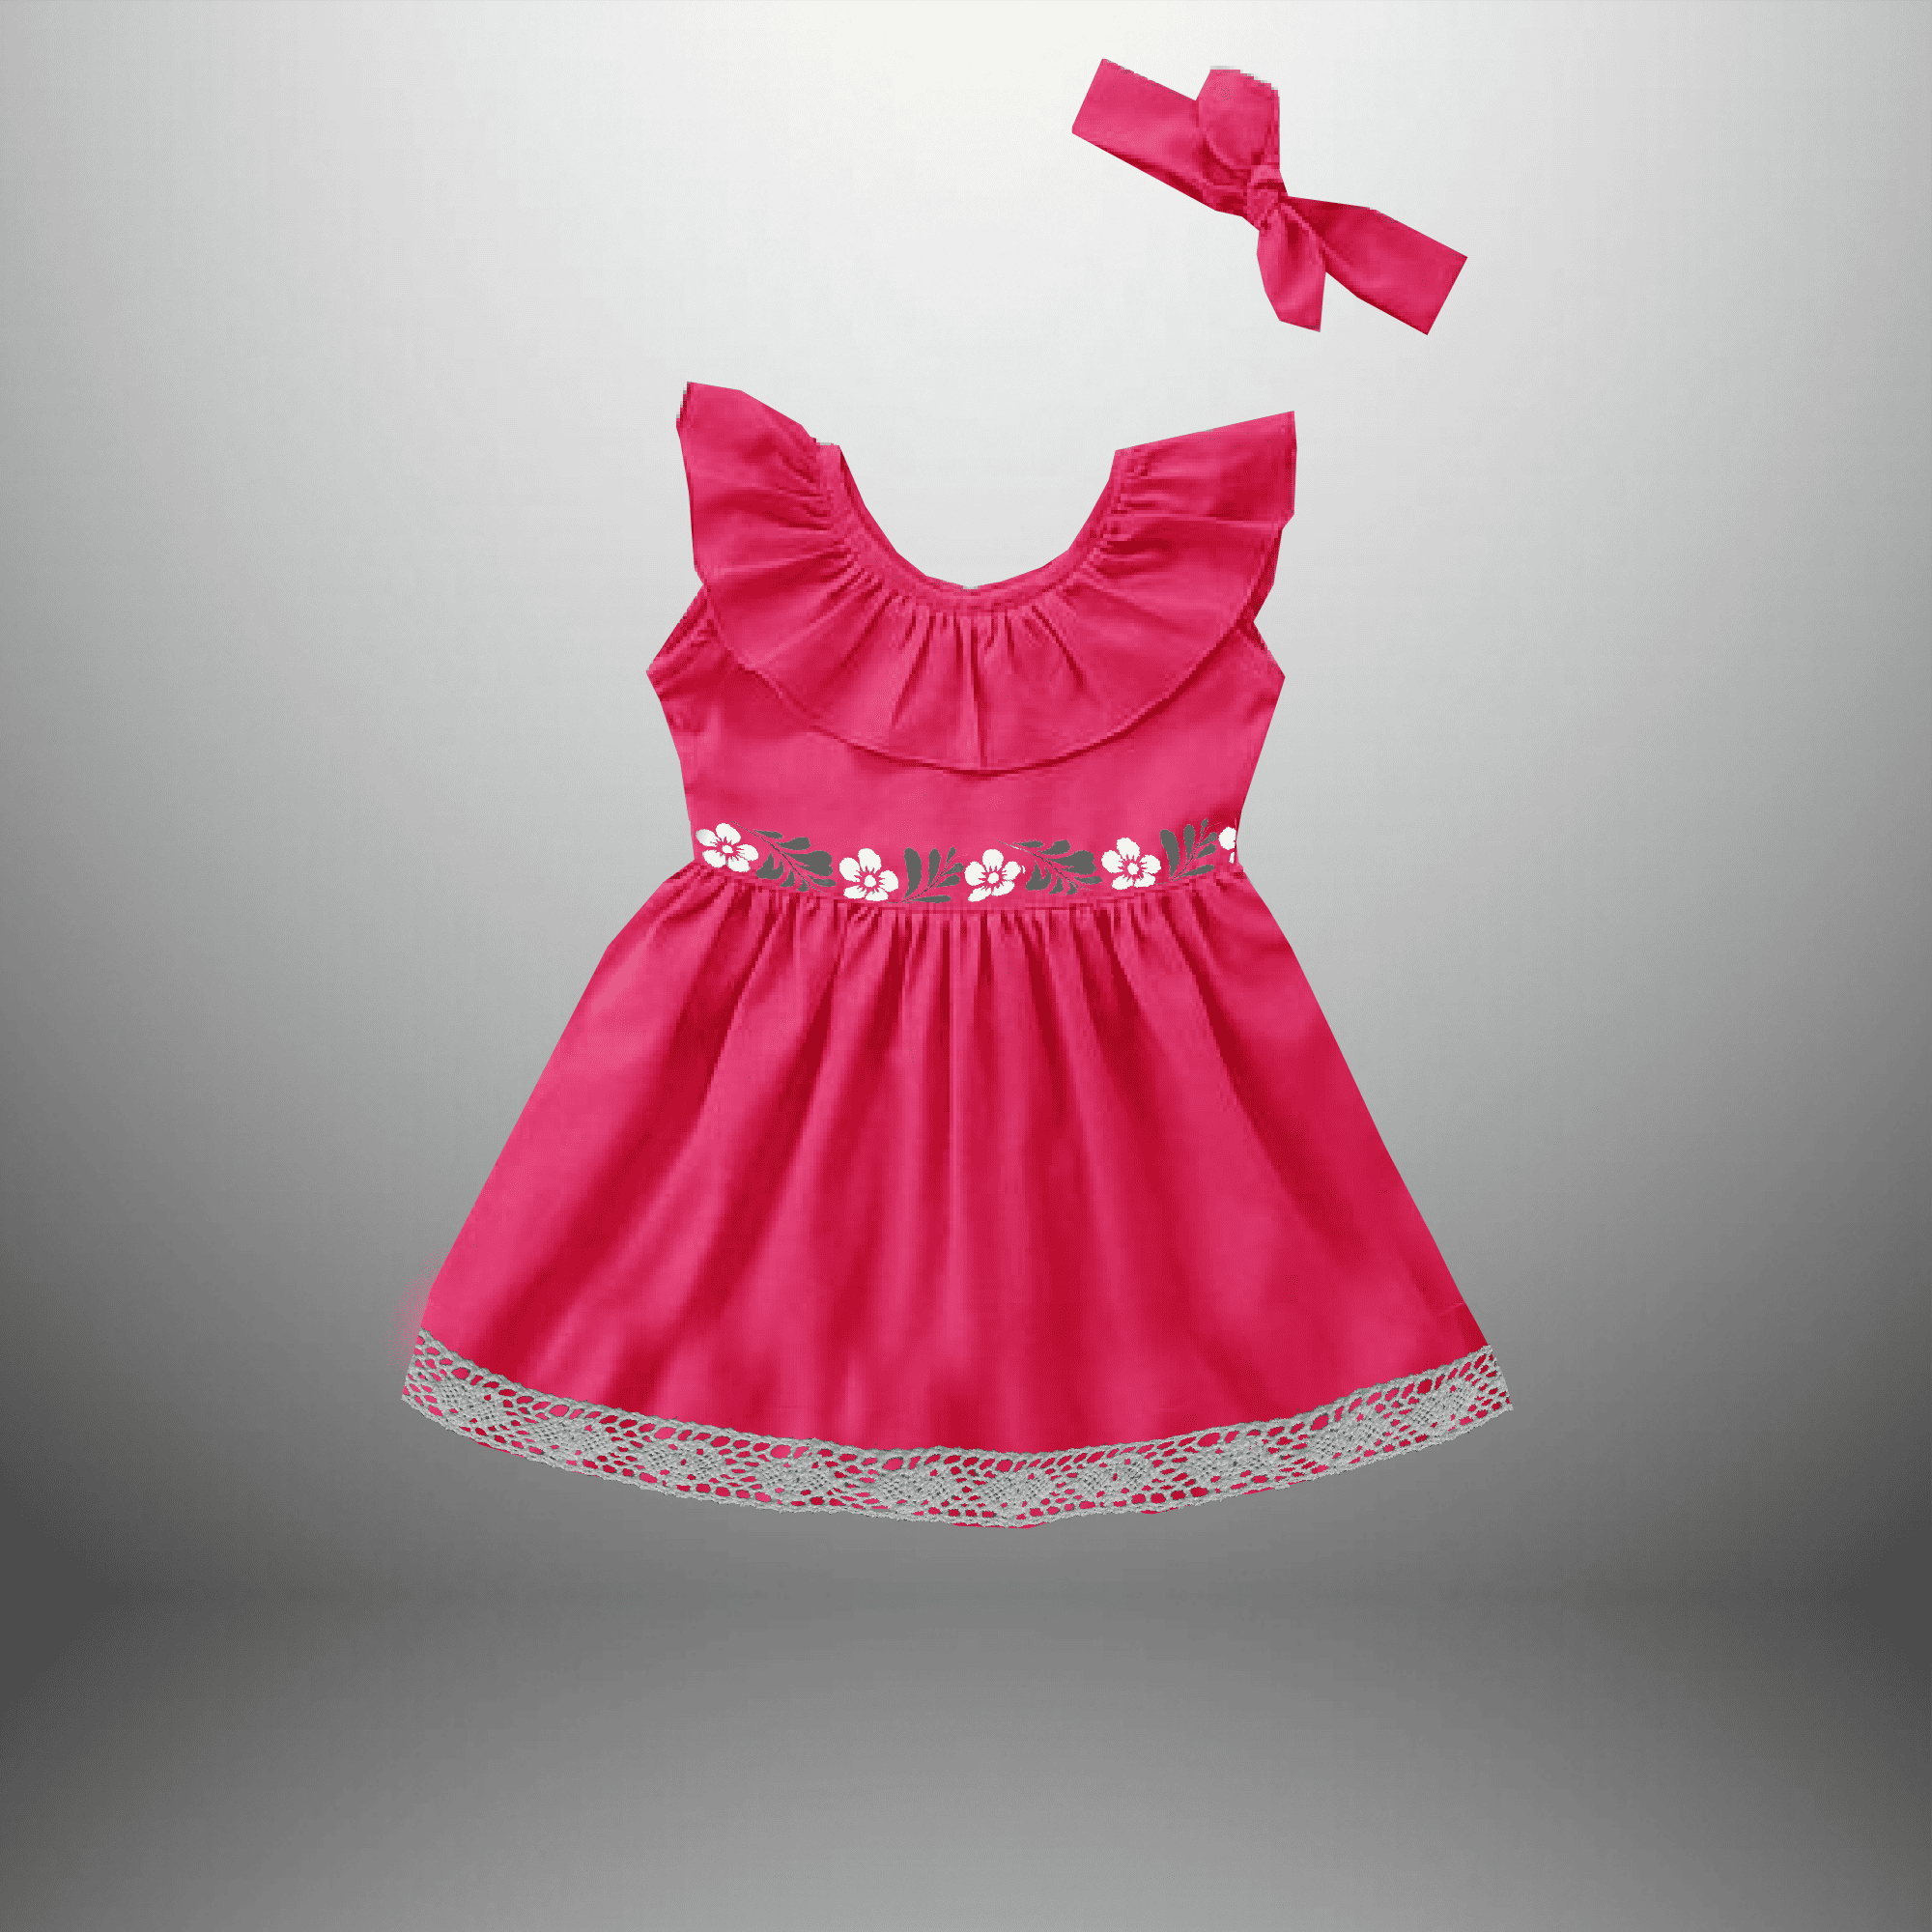 Girl's pretty pink dress with lace work & painting-RKFCW456